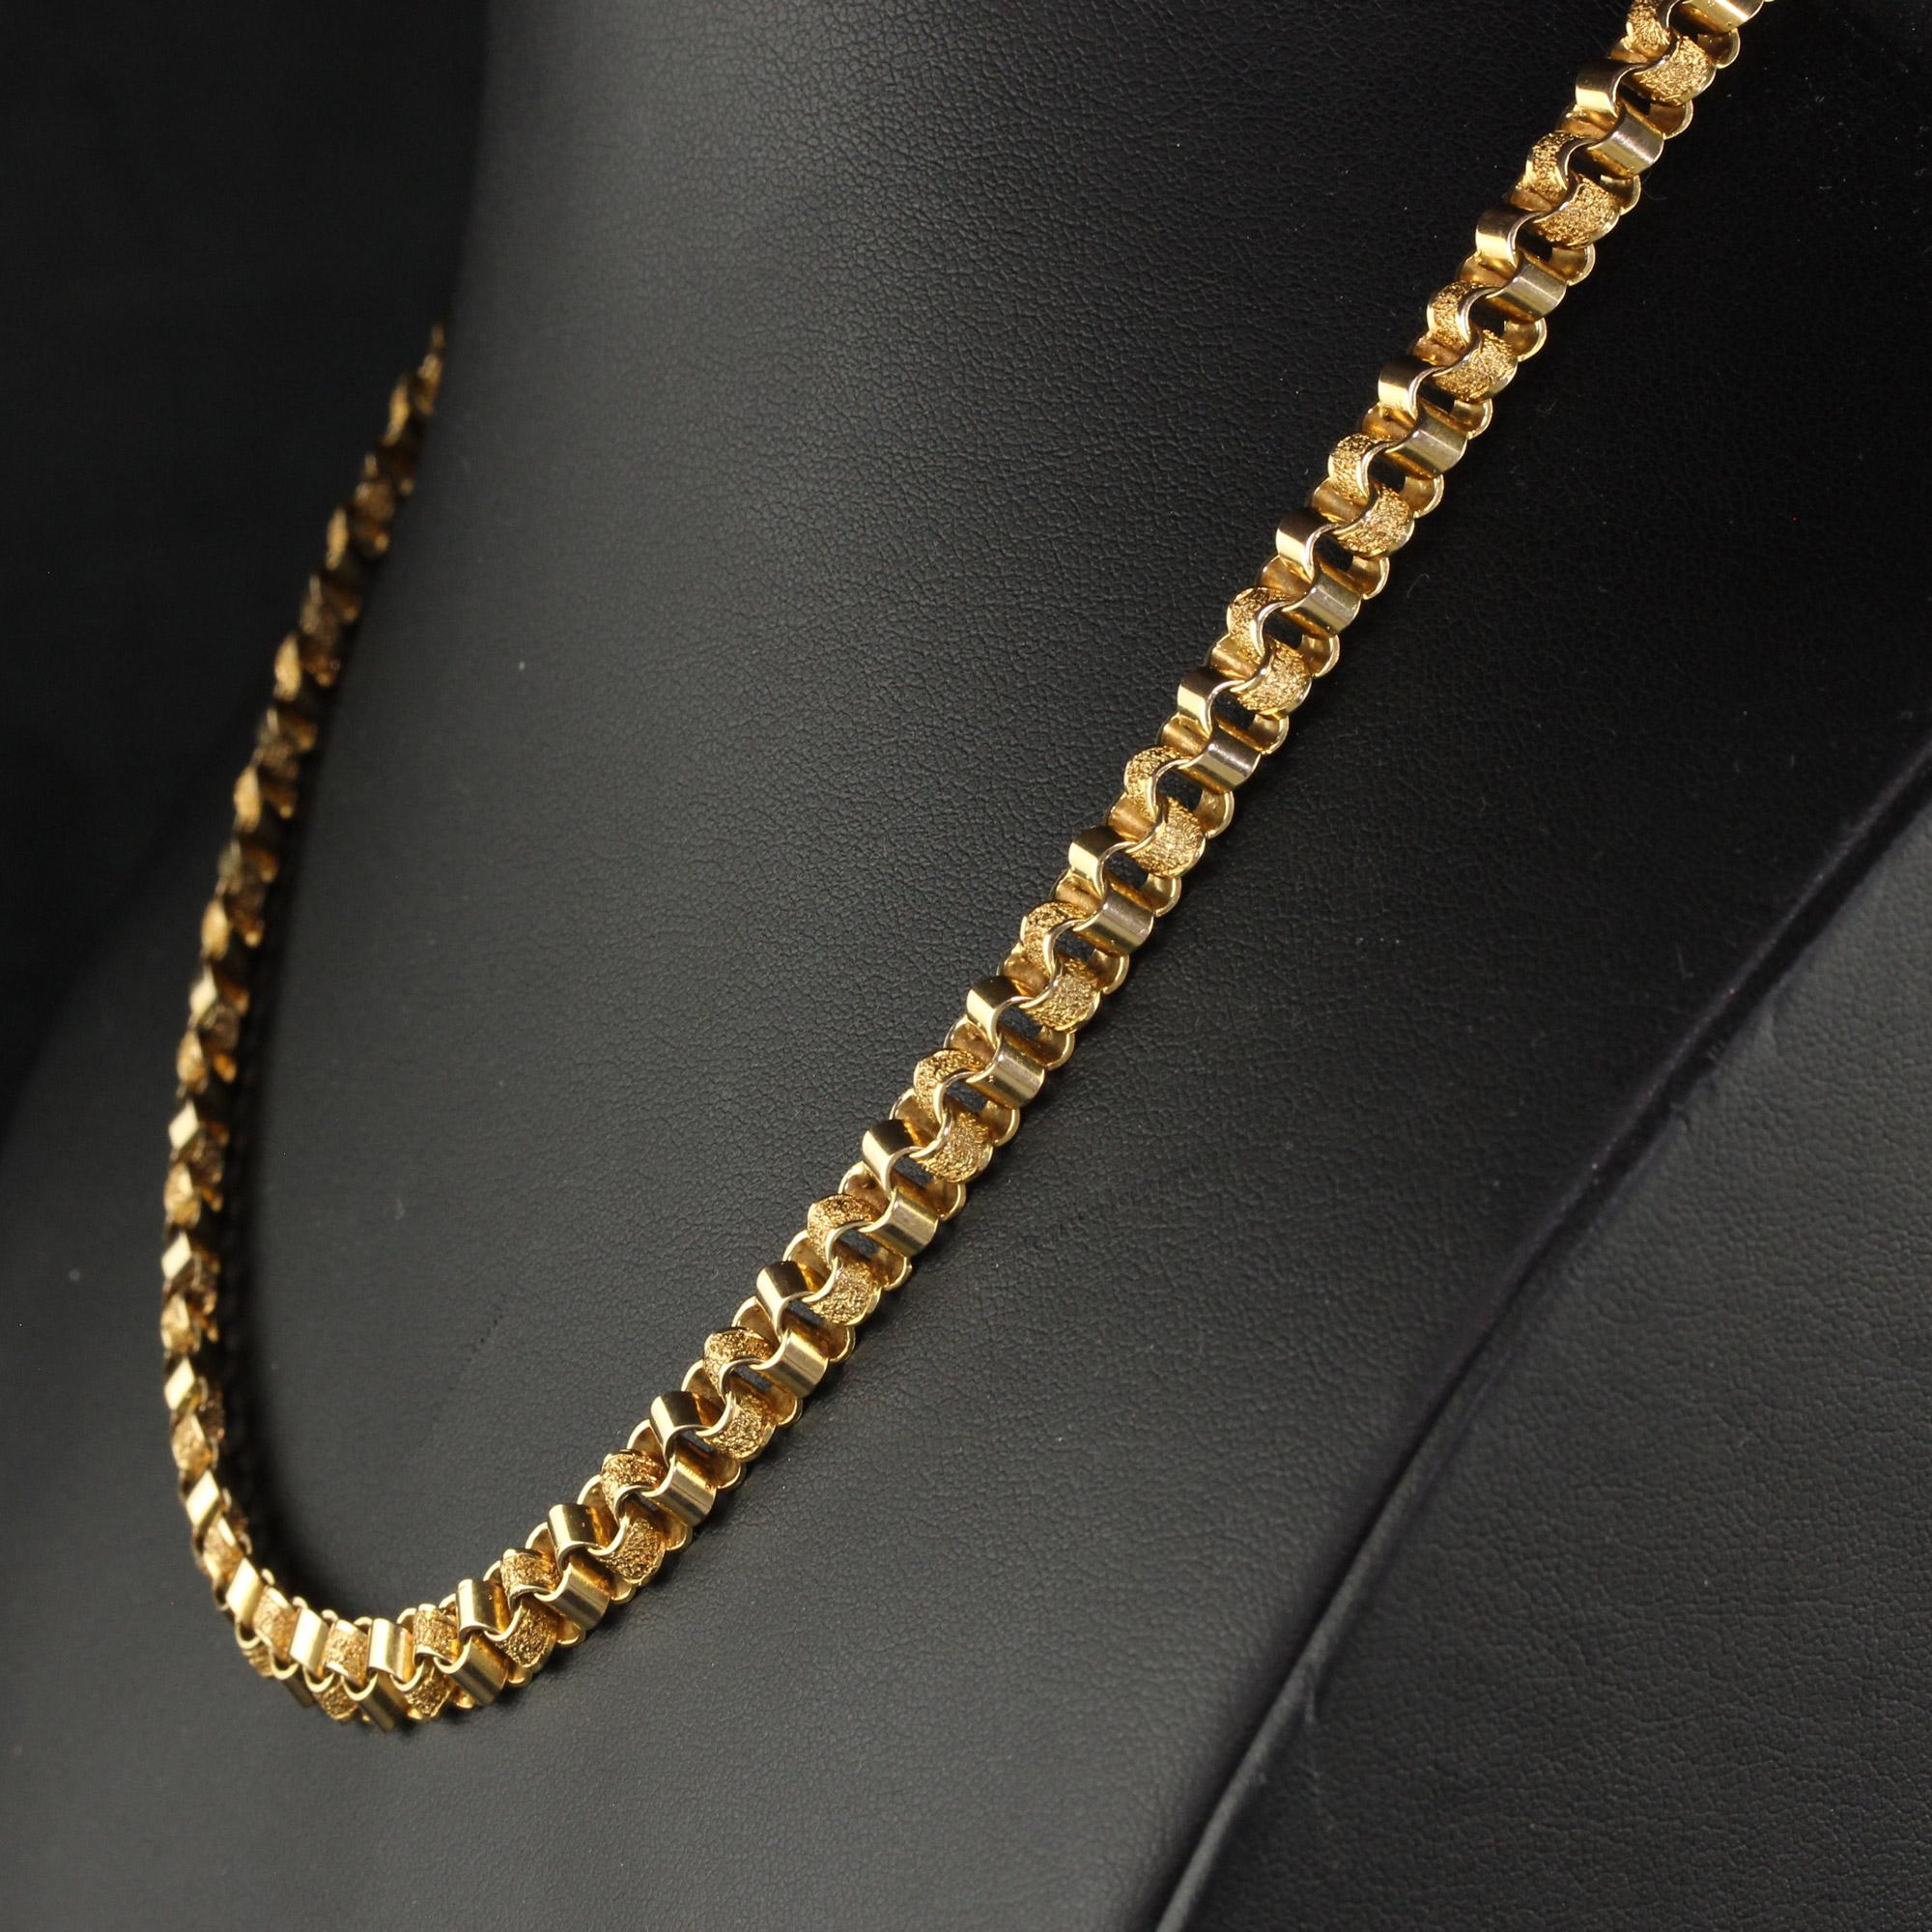 Antique Art Deco 14K Yellow Gold Flat Geometric Link Chain Necklace For Sale 1